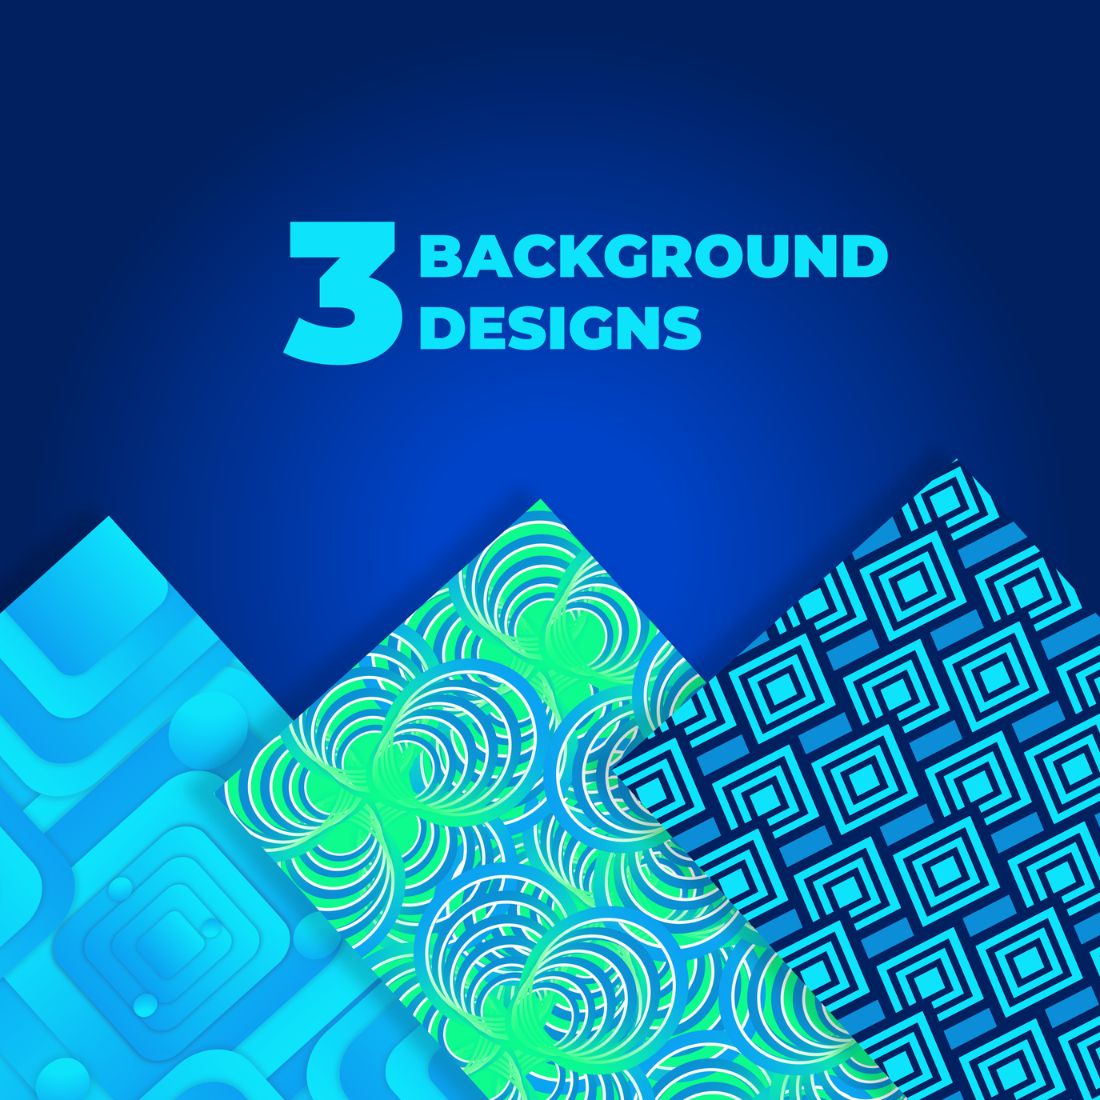 3 Abstract Style Beautiful Background Designs cover image.